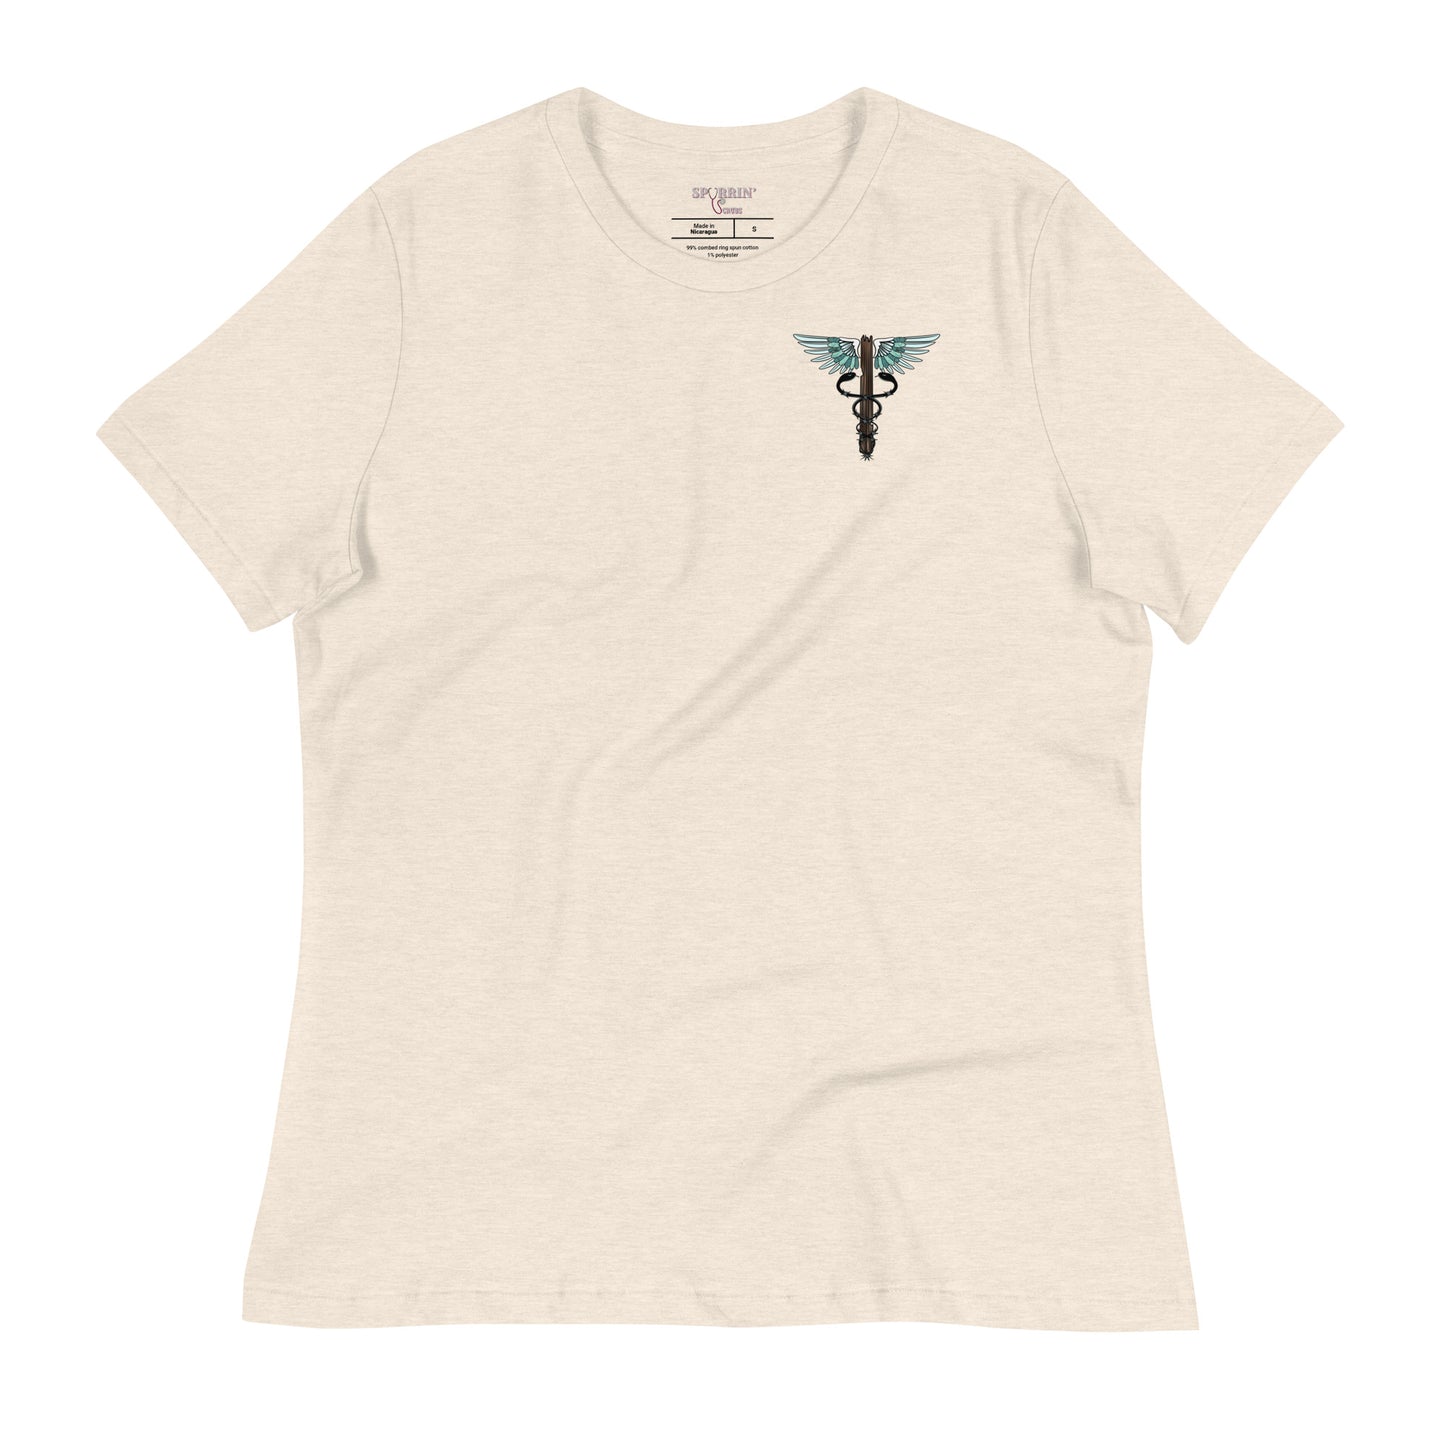 Support Your Local- Light Colors Women's Relaxed T-Shirt